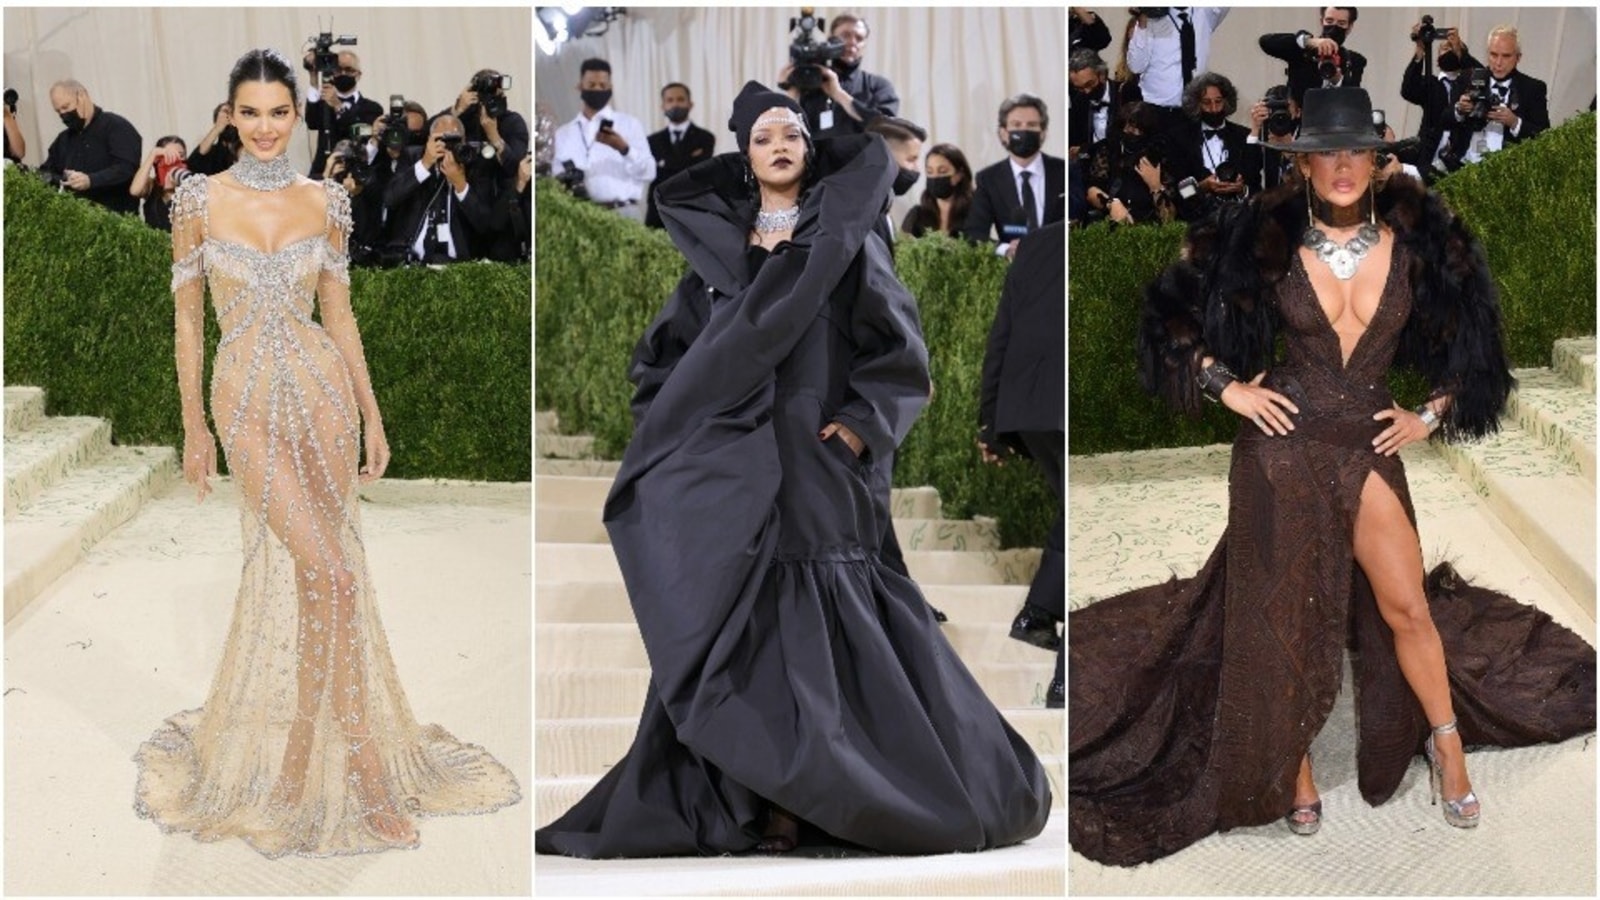 Met Gala 2021 LIVE updates: Red carpet, theme, outfits, fashion